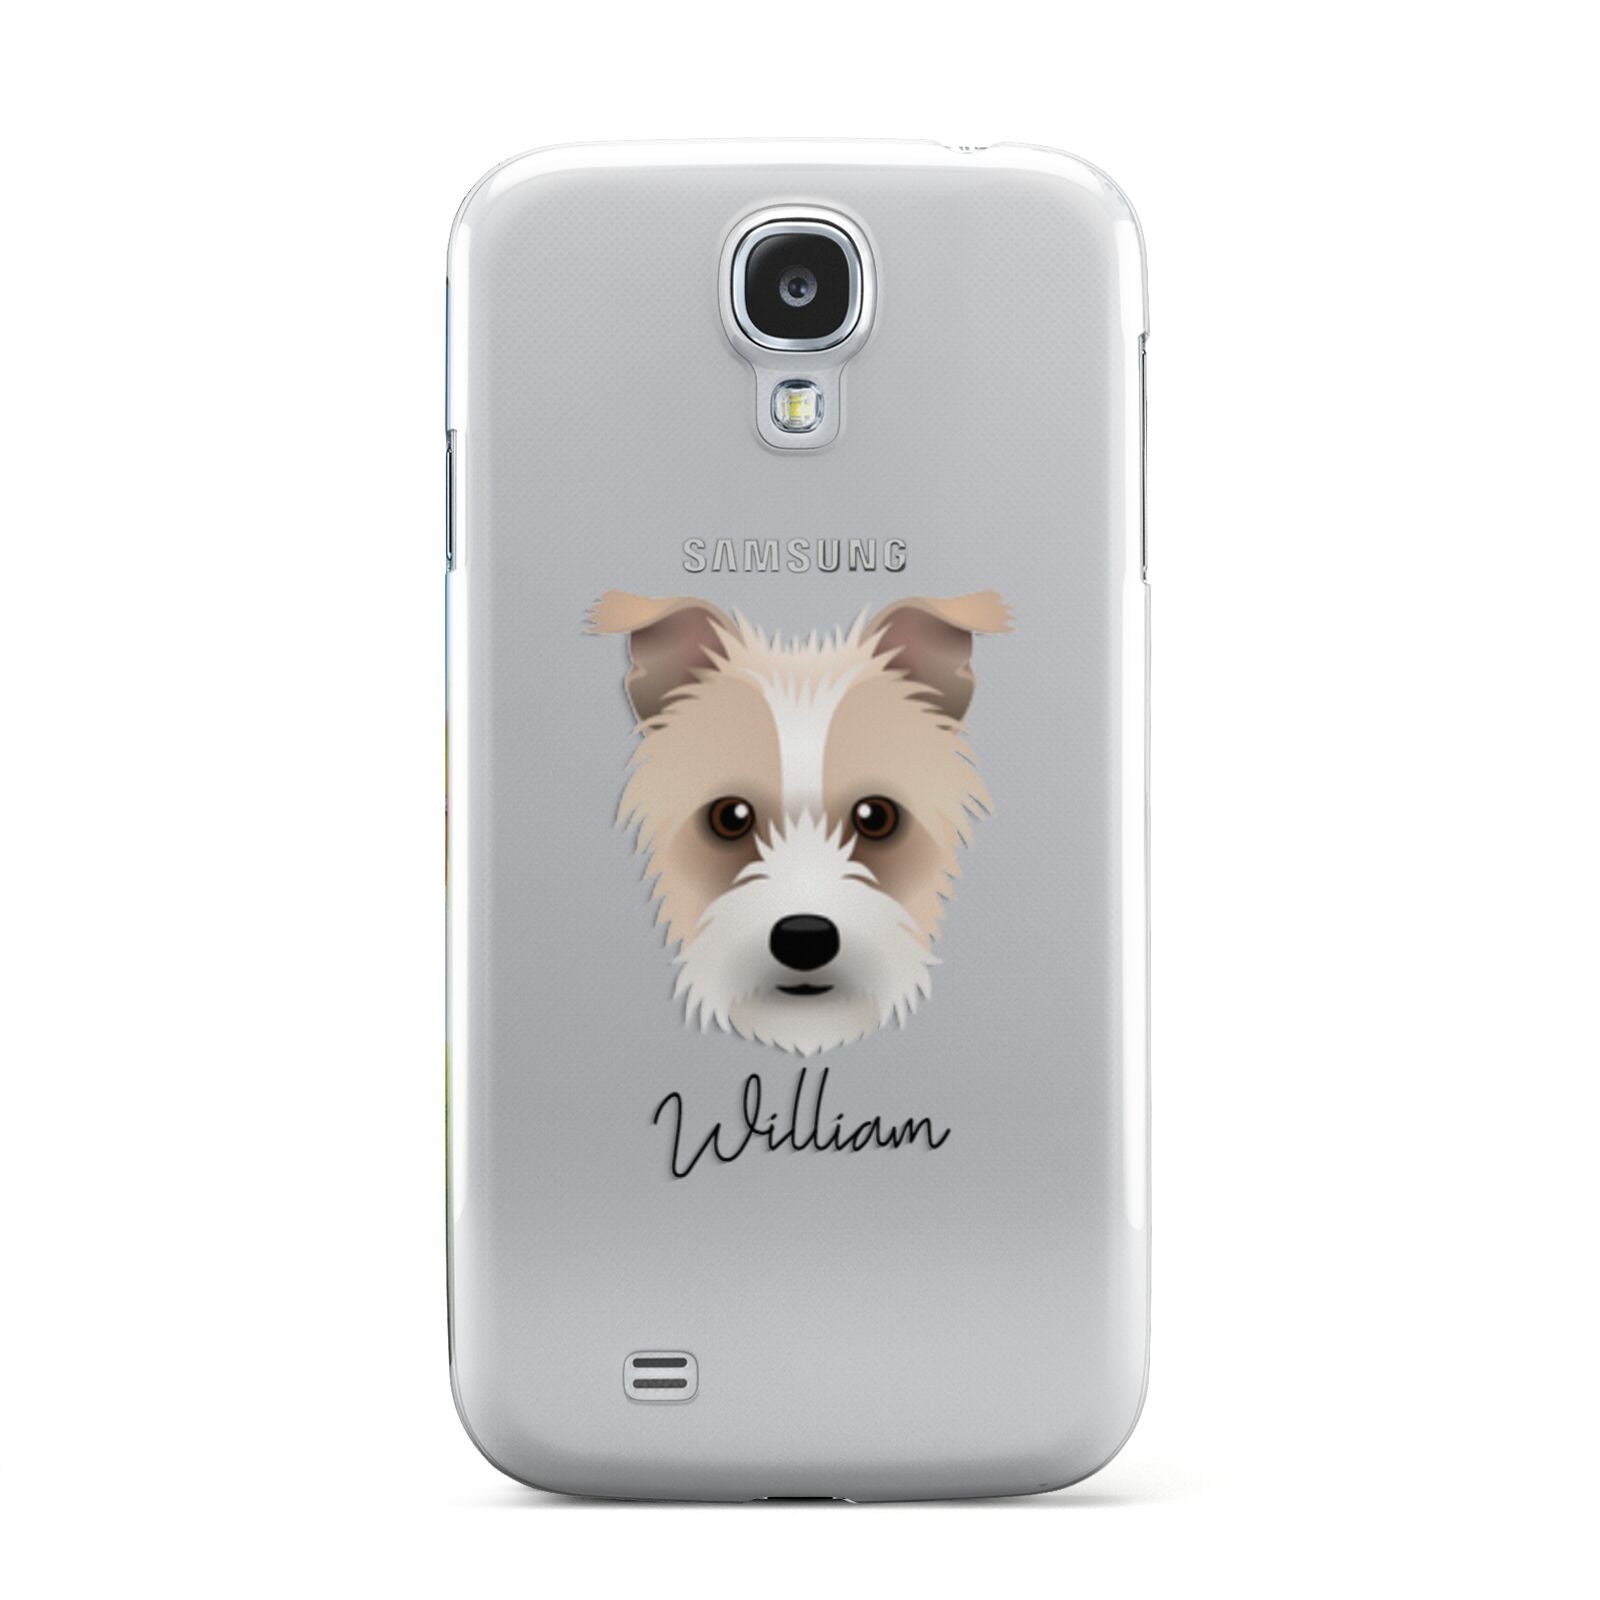 Sporting Lucas Terrier Personalised Samsung Galaxy S4 Case